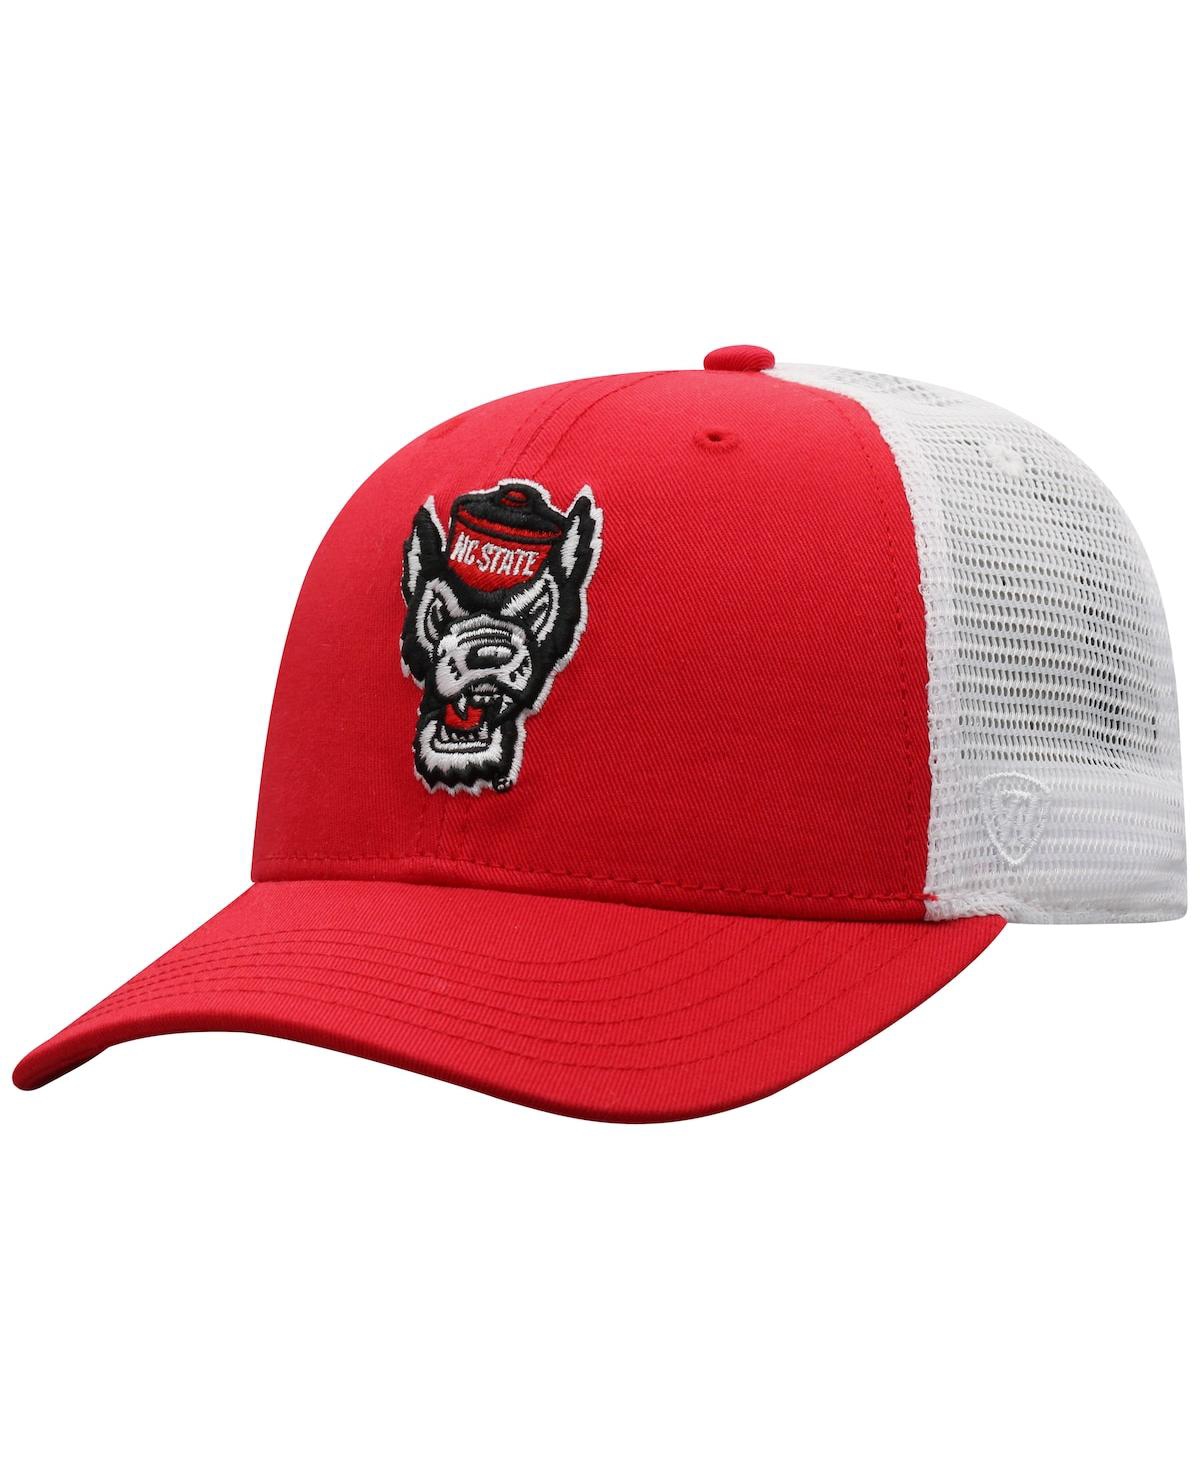 TOP OF THE WORLD MEN'S TOP OF THE WORLD RED, WHITE NC STATE WOLFPACK TRUCKER SNAPBACK HAT